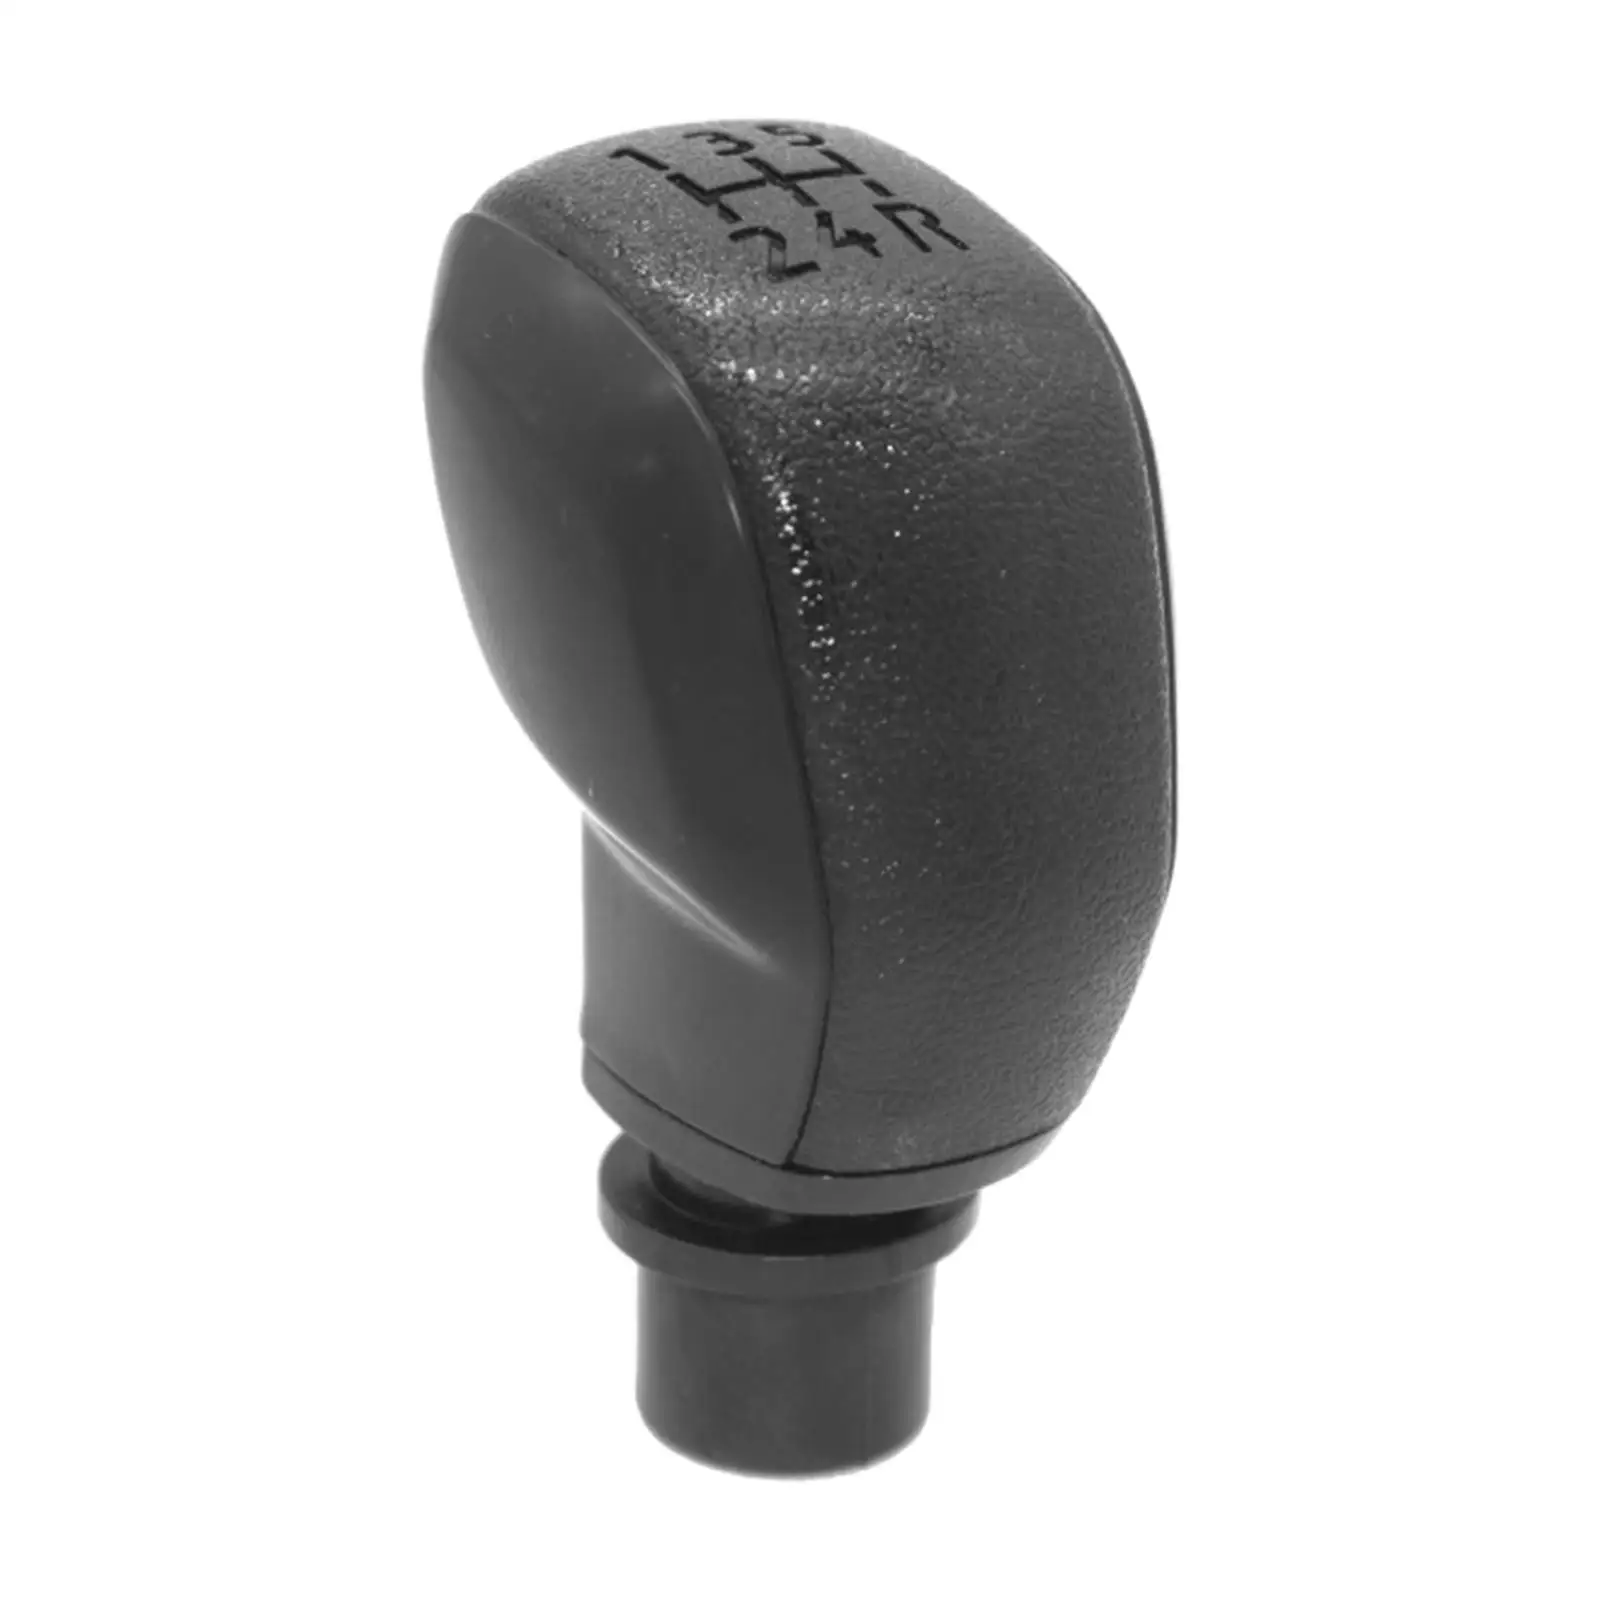 Car Gear Shift Knob Dustproof Hand Tool for Vehicle Replacements Part